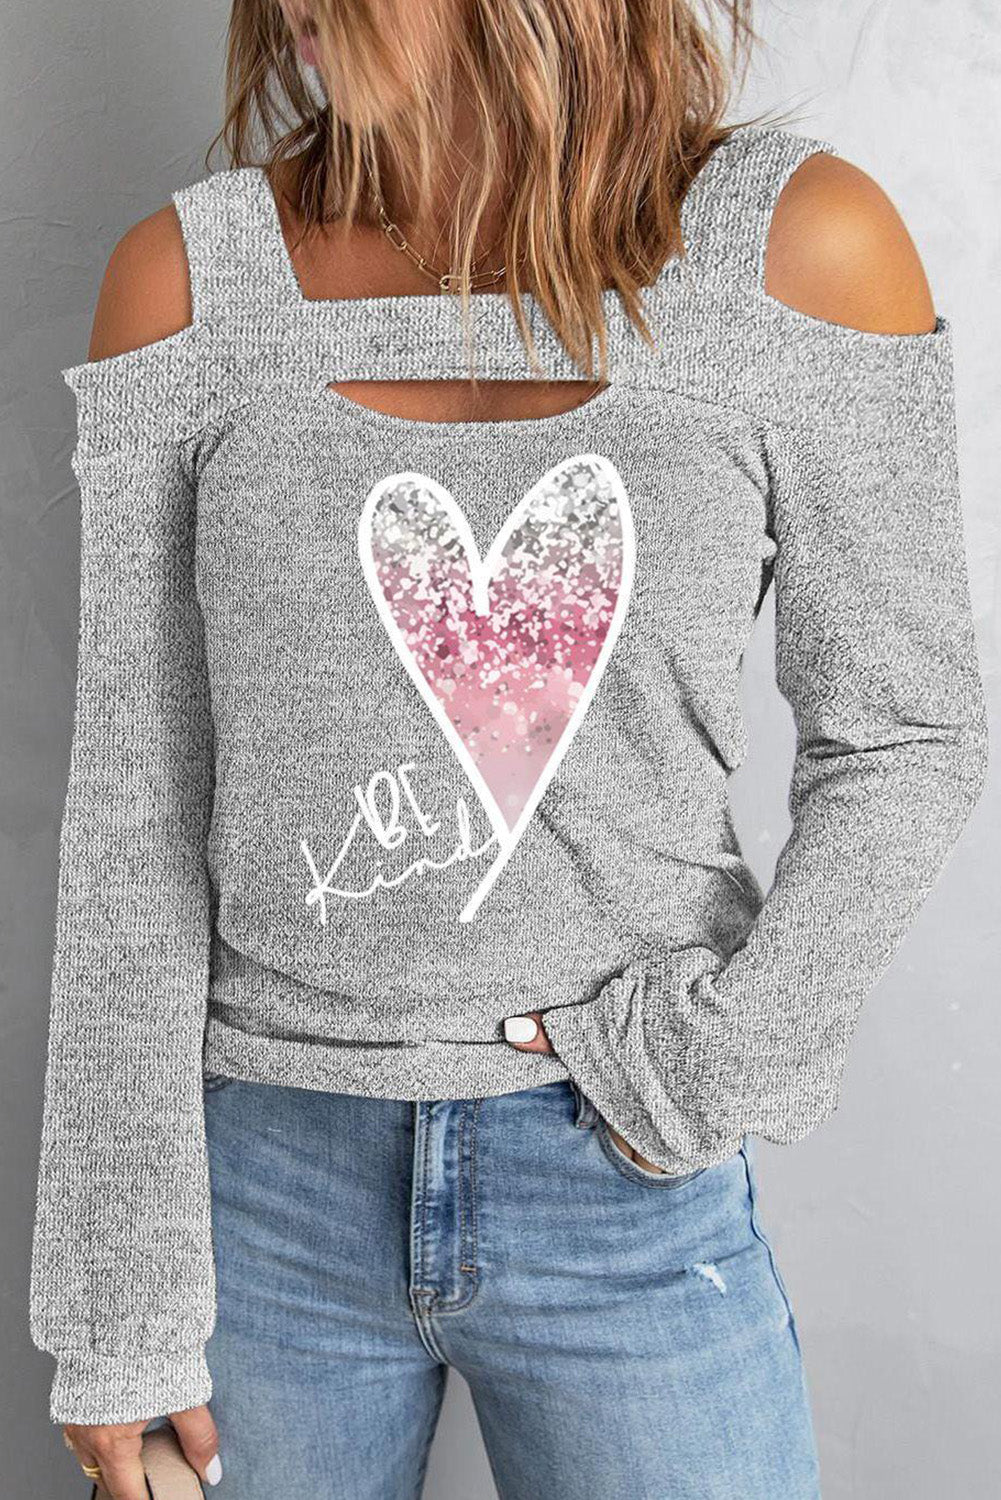 Ombre Heart-Shaped Cold Shoulder Long Sleeve Top $ 29.99 - Evaless